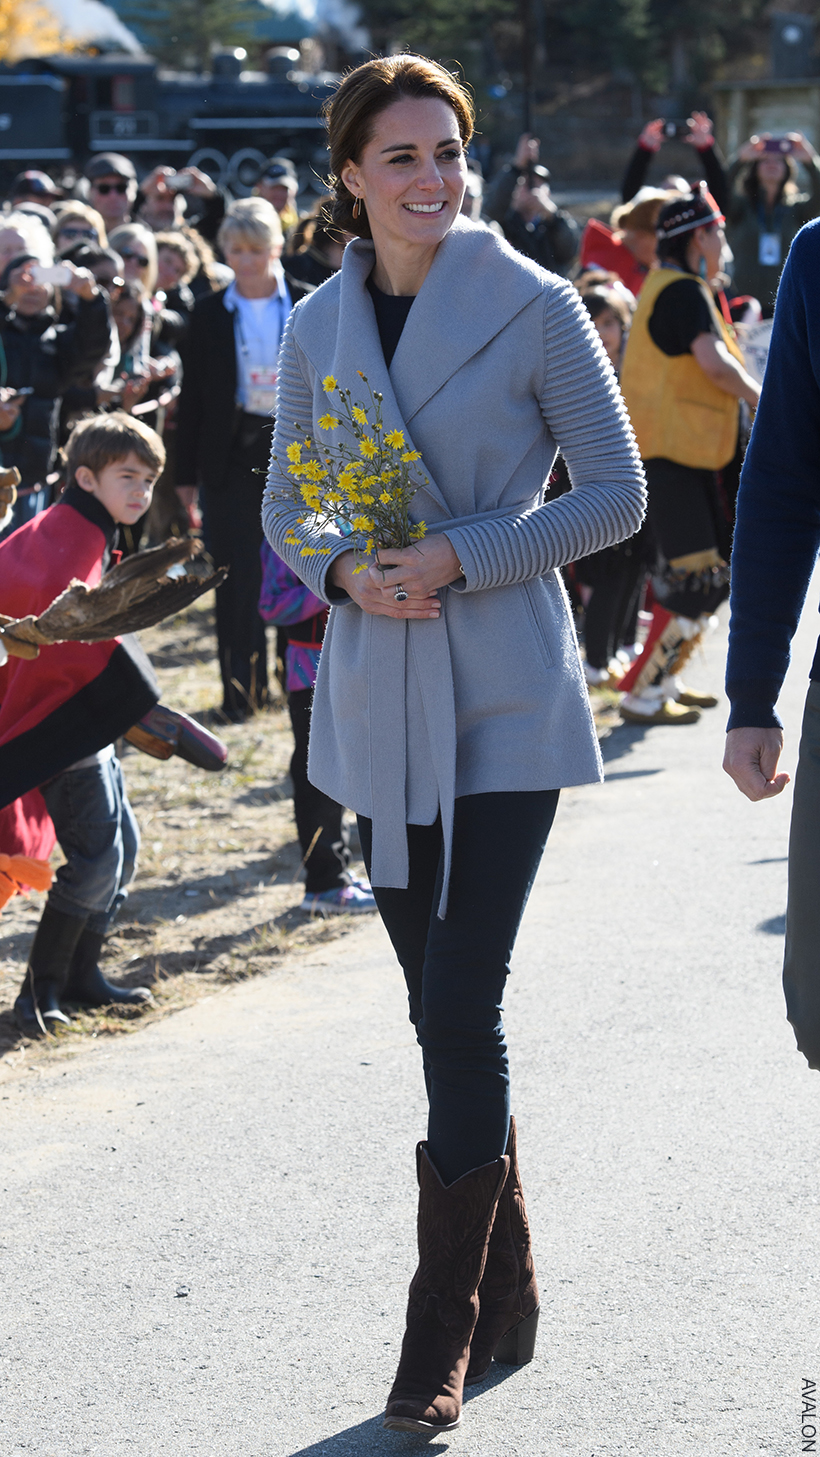 Kate Middleton in a casual grey 'coatigan' over jeans with cowboy boots.  Her hair is up and she's holding a bunch of yellow flowers.